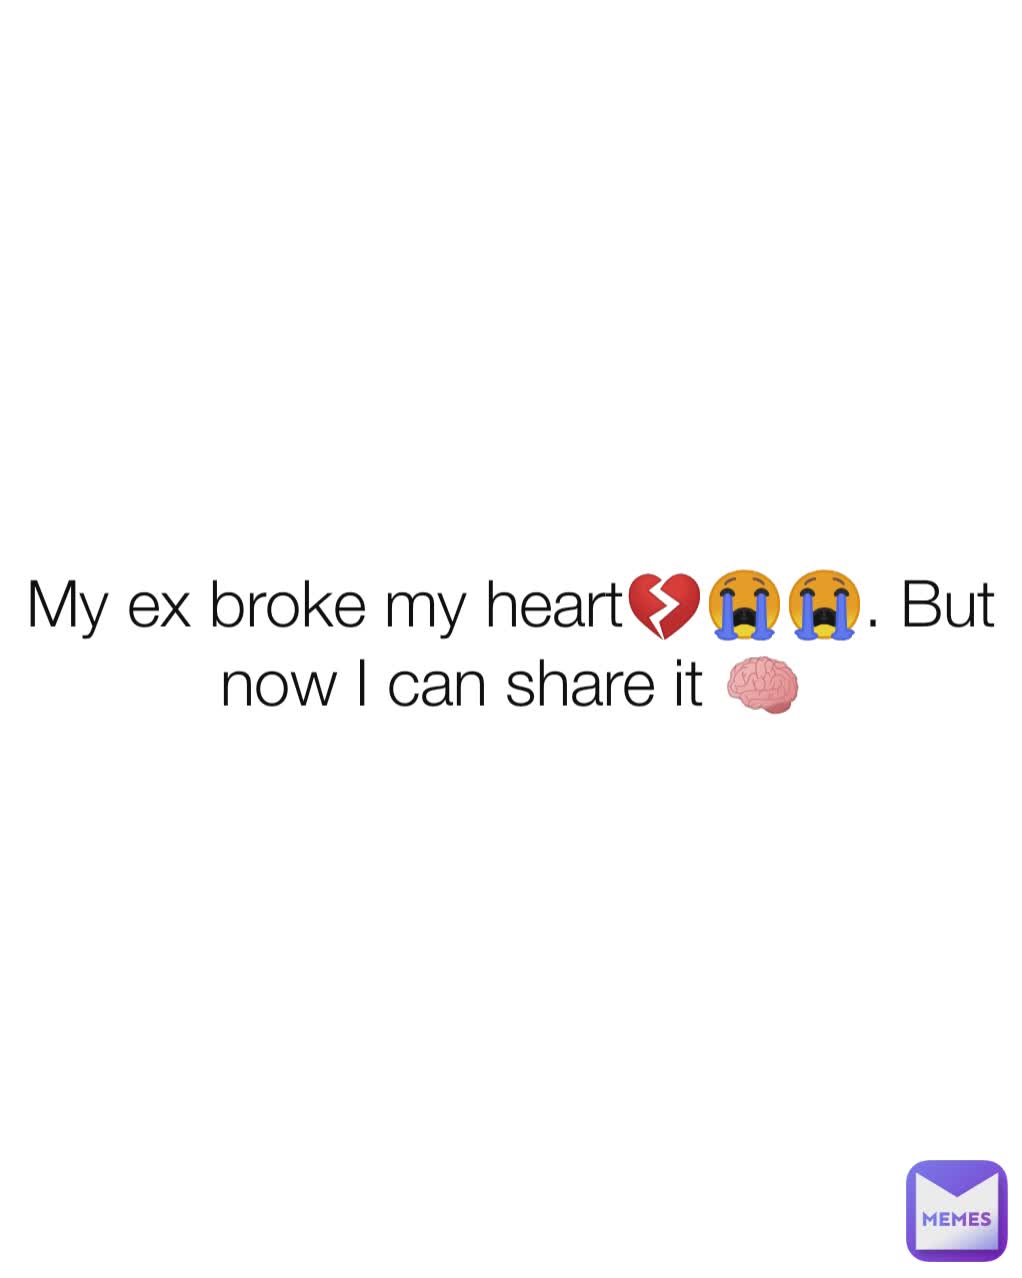 My ex broke my heart💔😭😭. But now I can share it 🧠